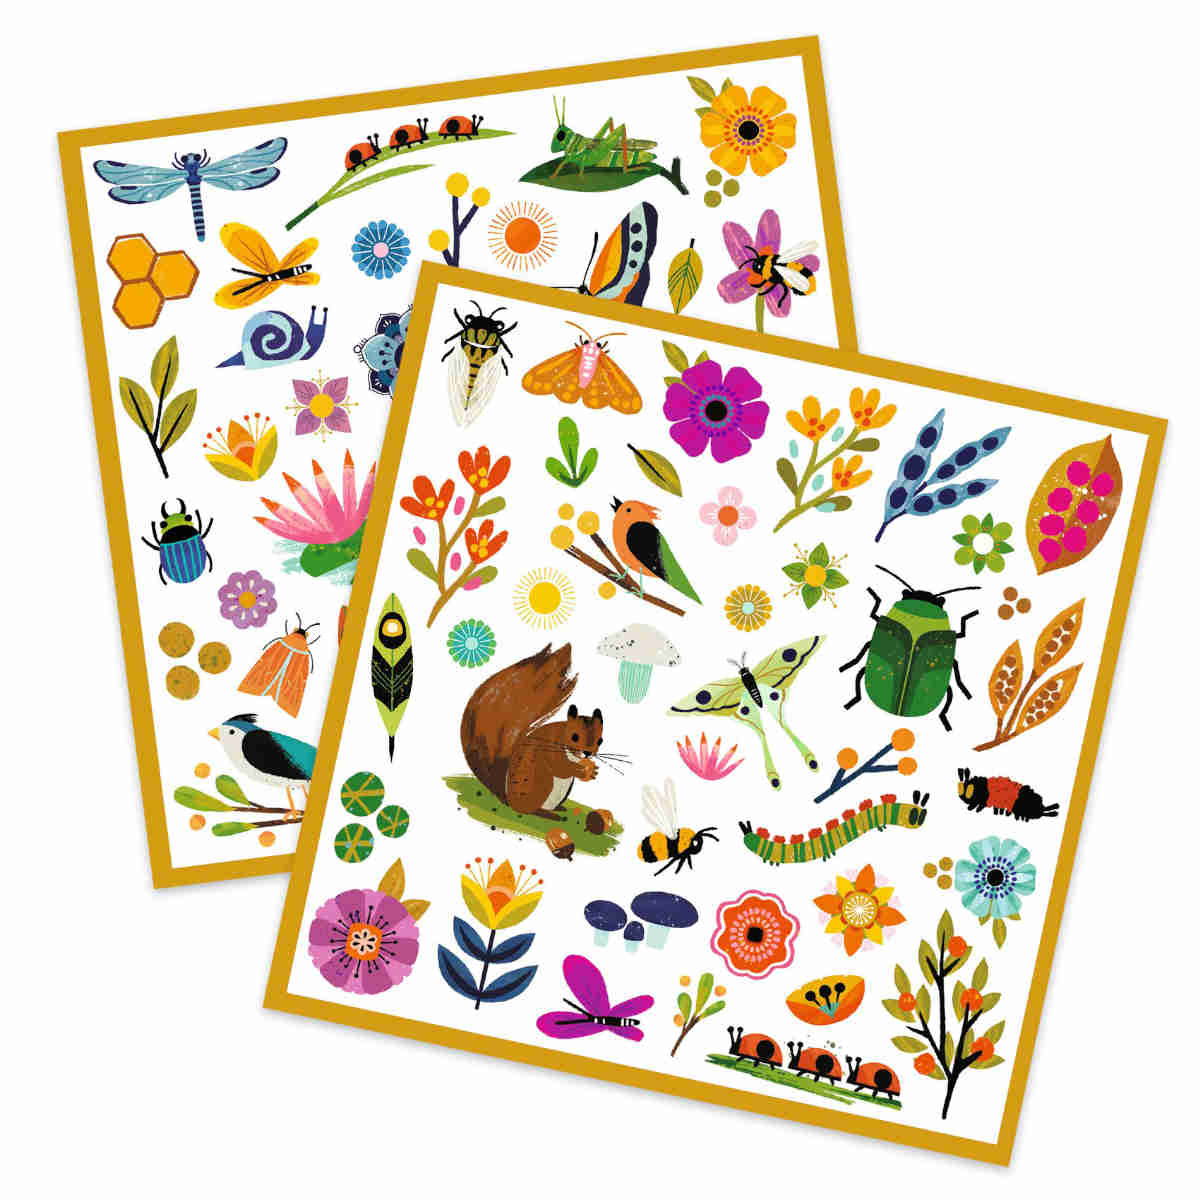 Front view of 2 sticker sheets overlapping each other against a white background.